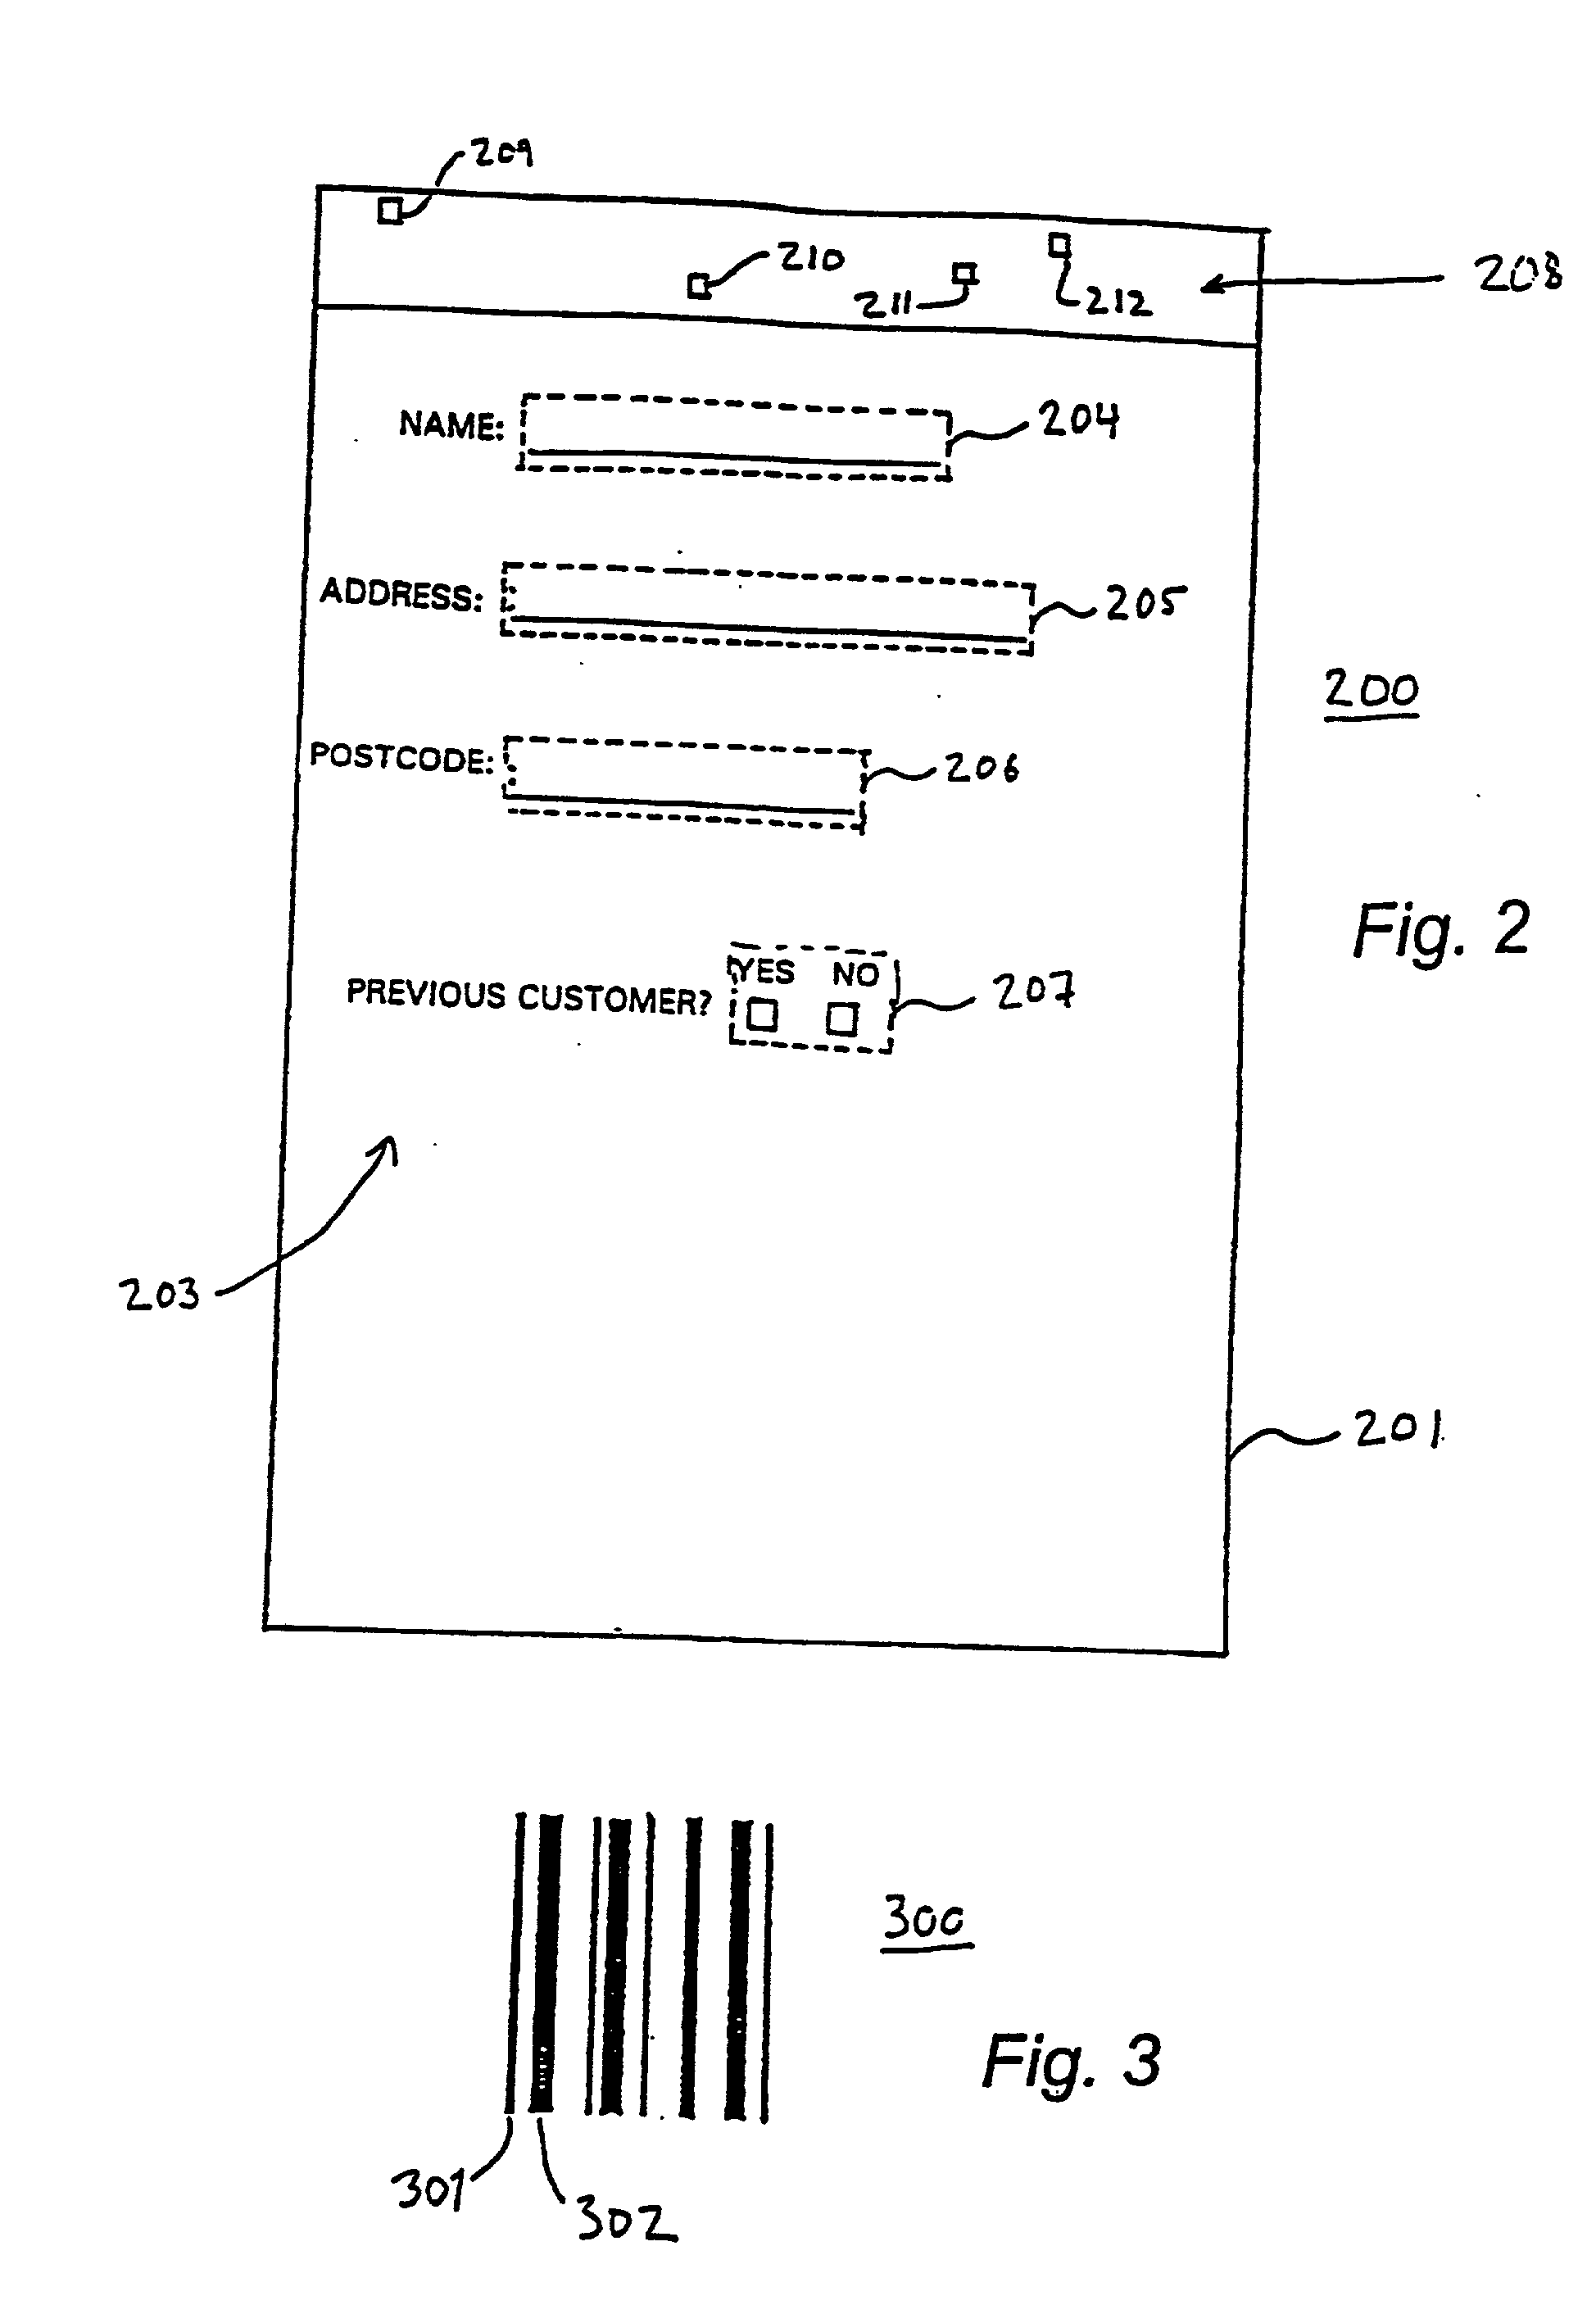 Data form having a position-coding pattern detectable by an optical sensor